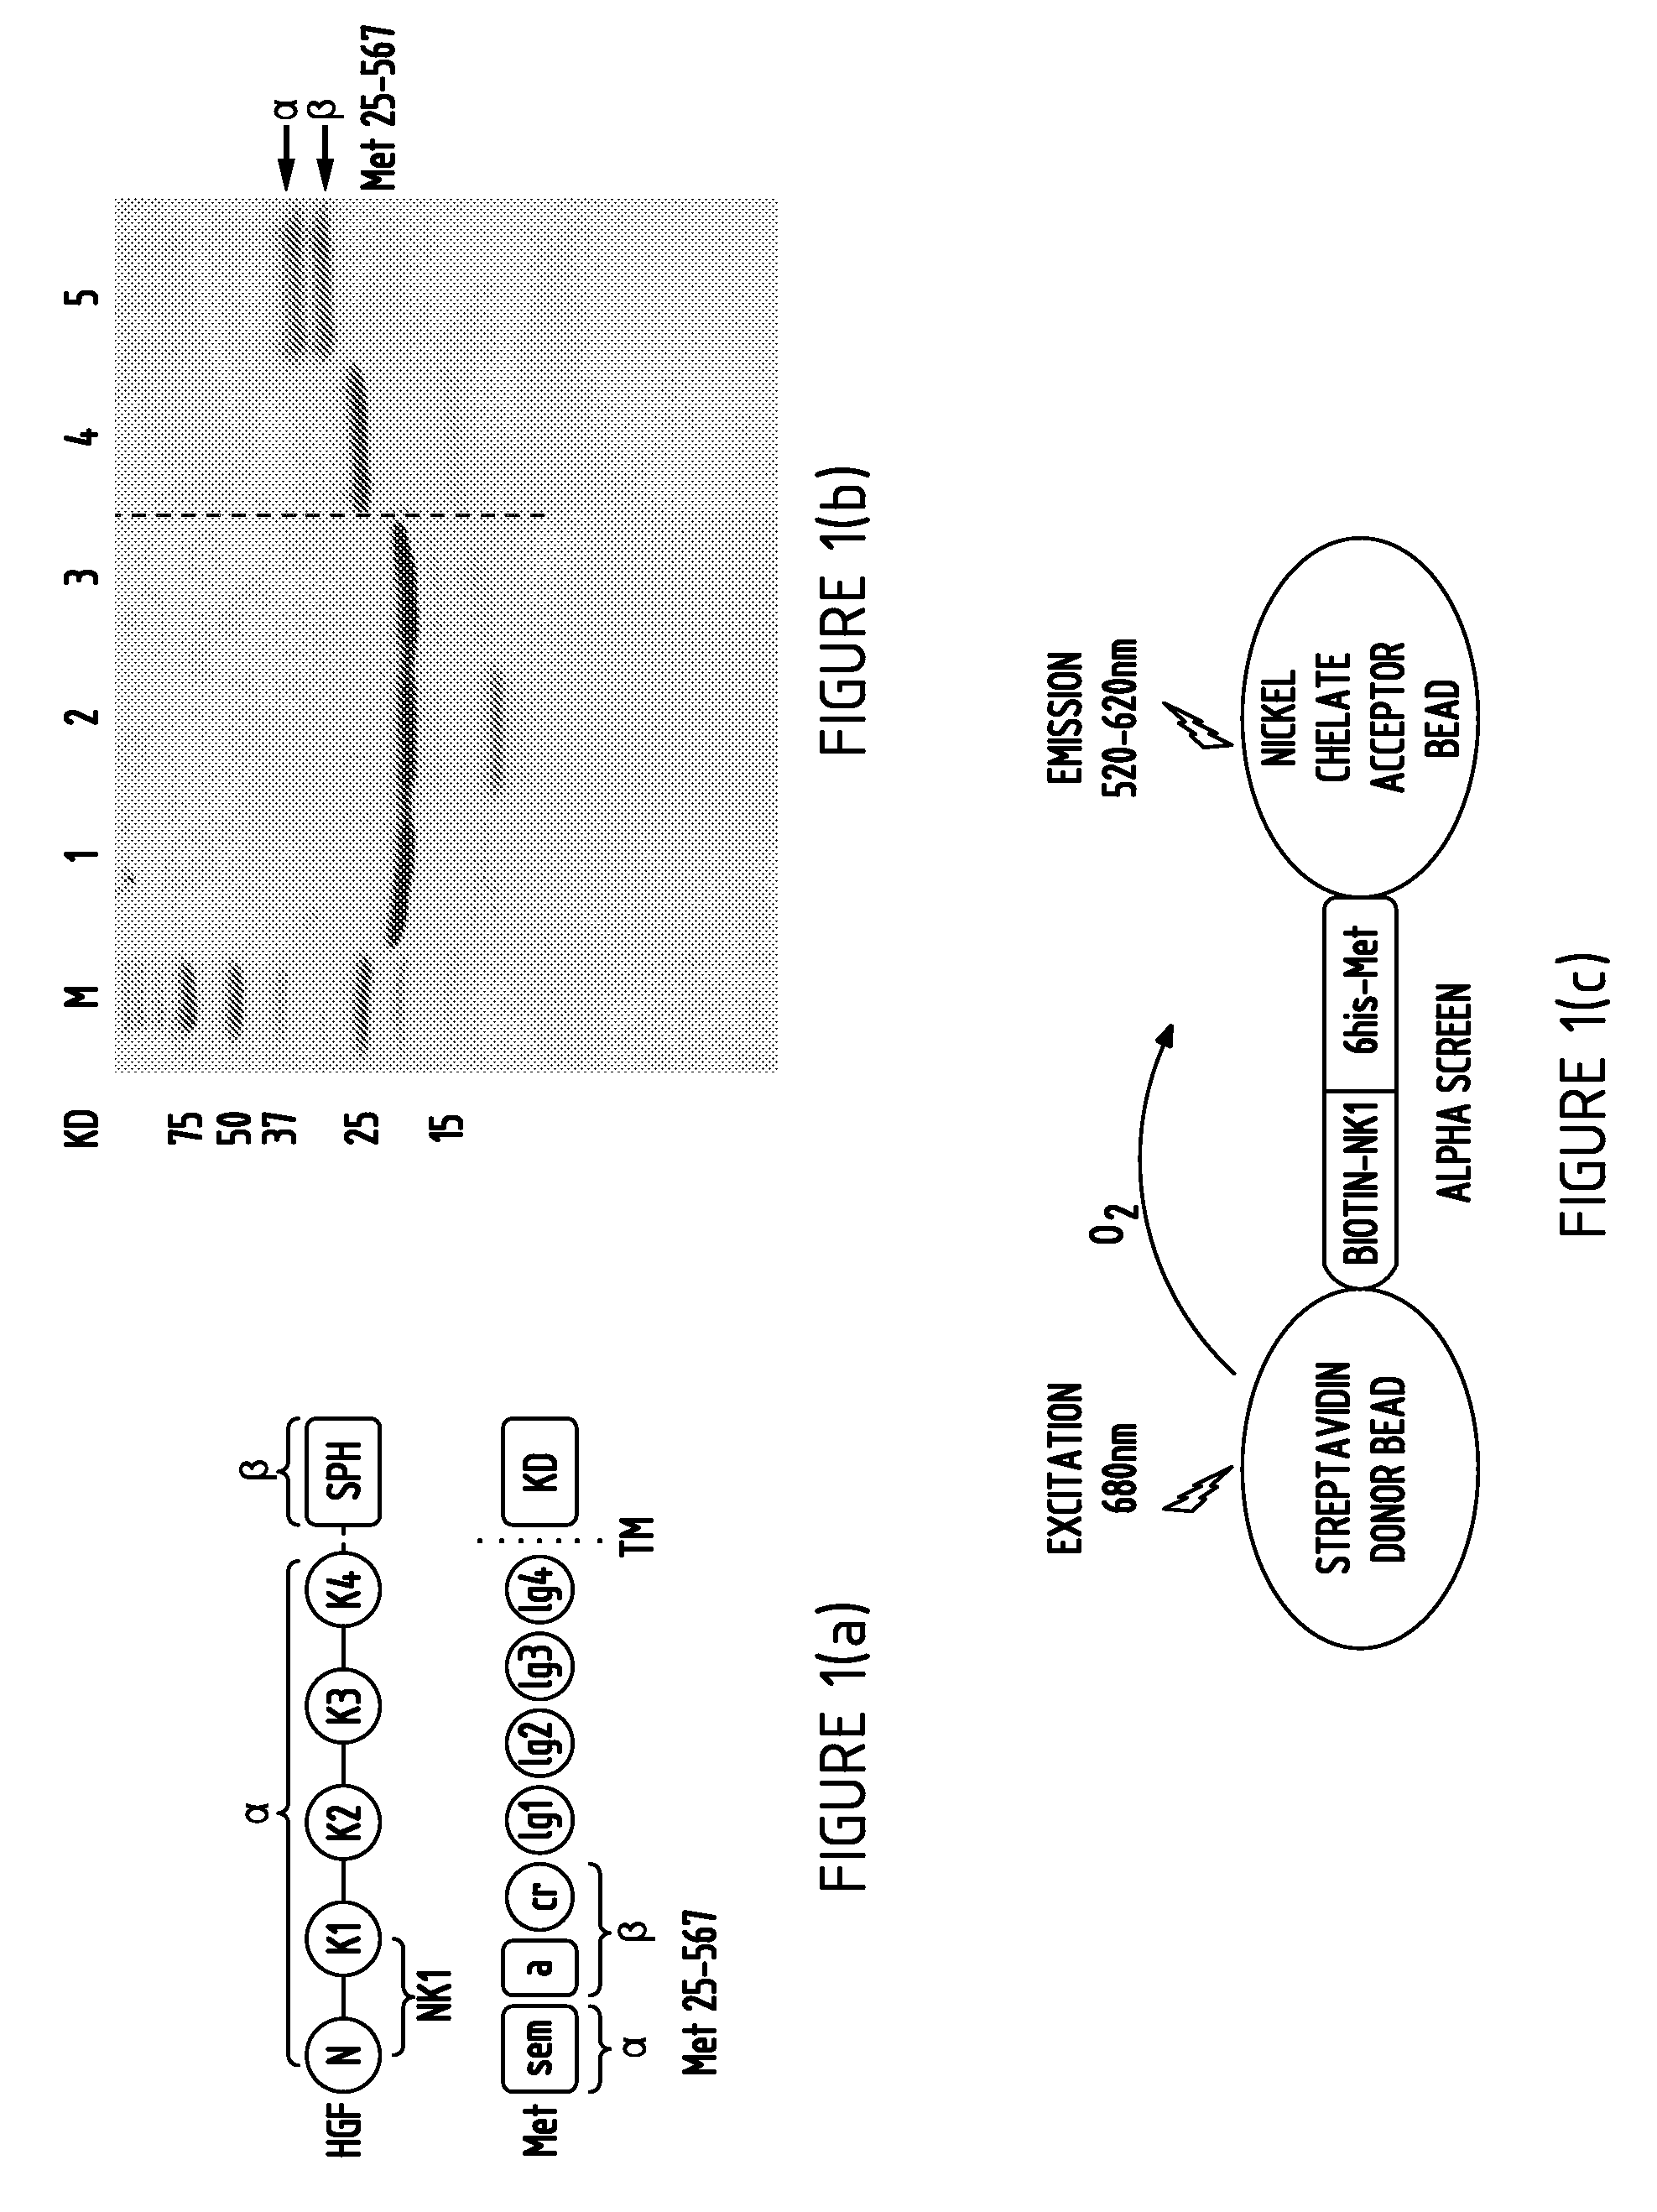 Nk1-based polypeptides and related methods